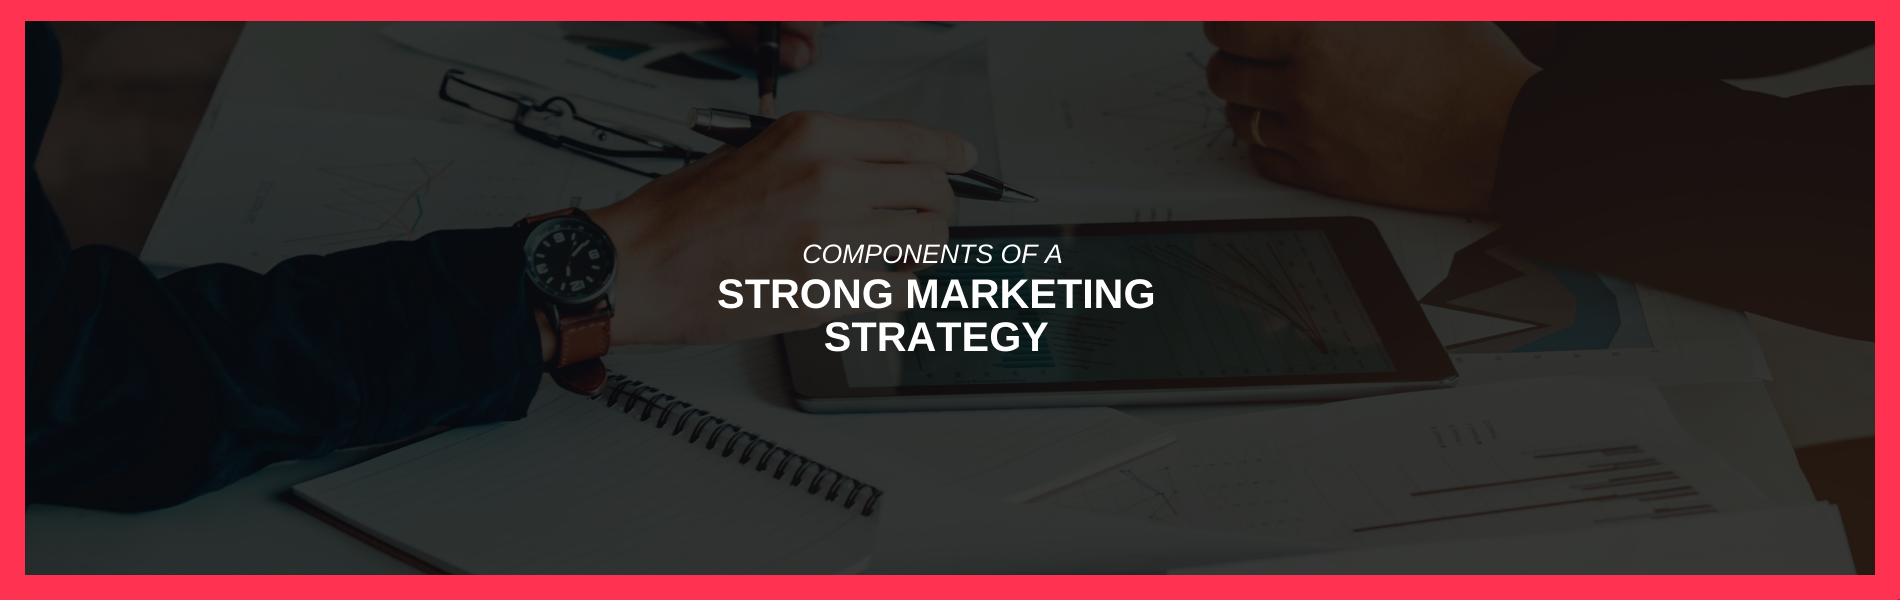 Components of a Strong Marketing Strategy